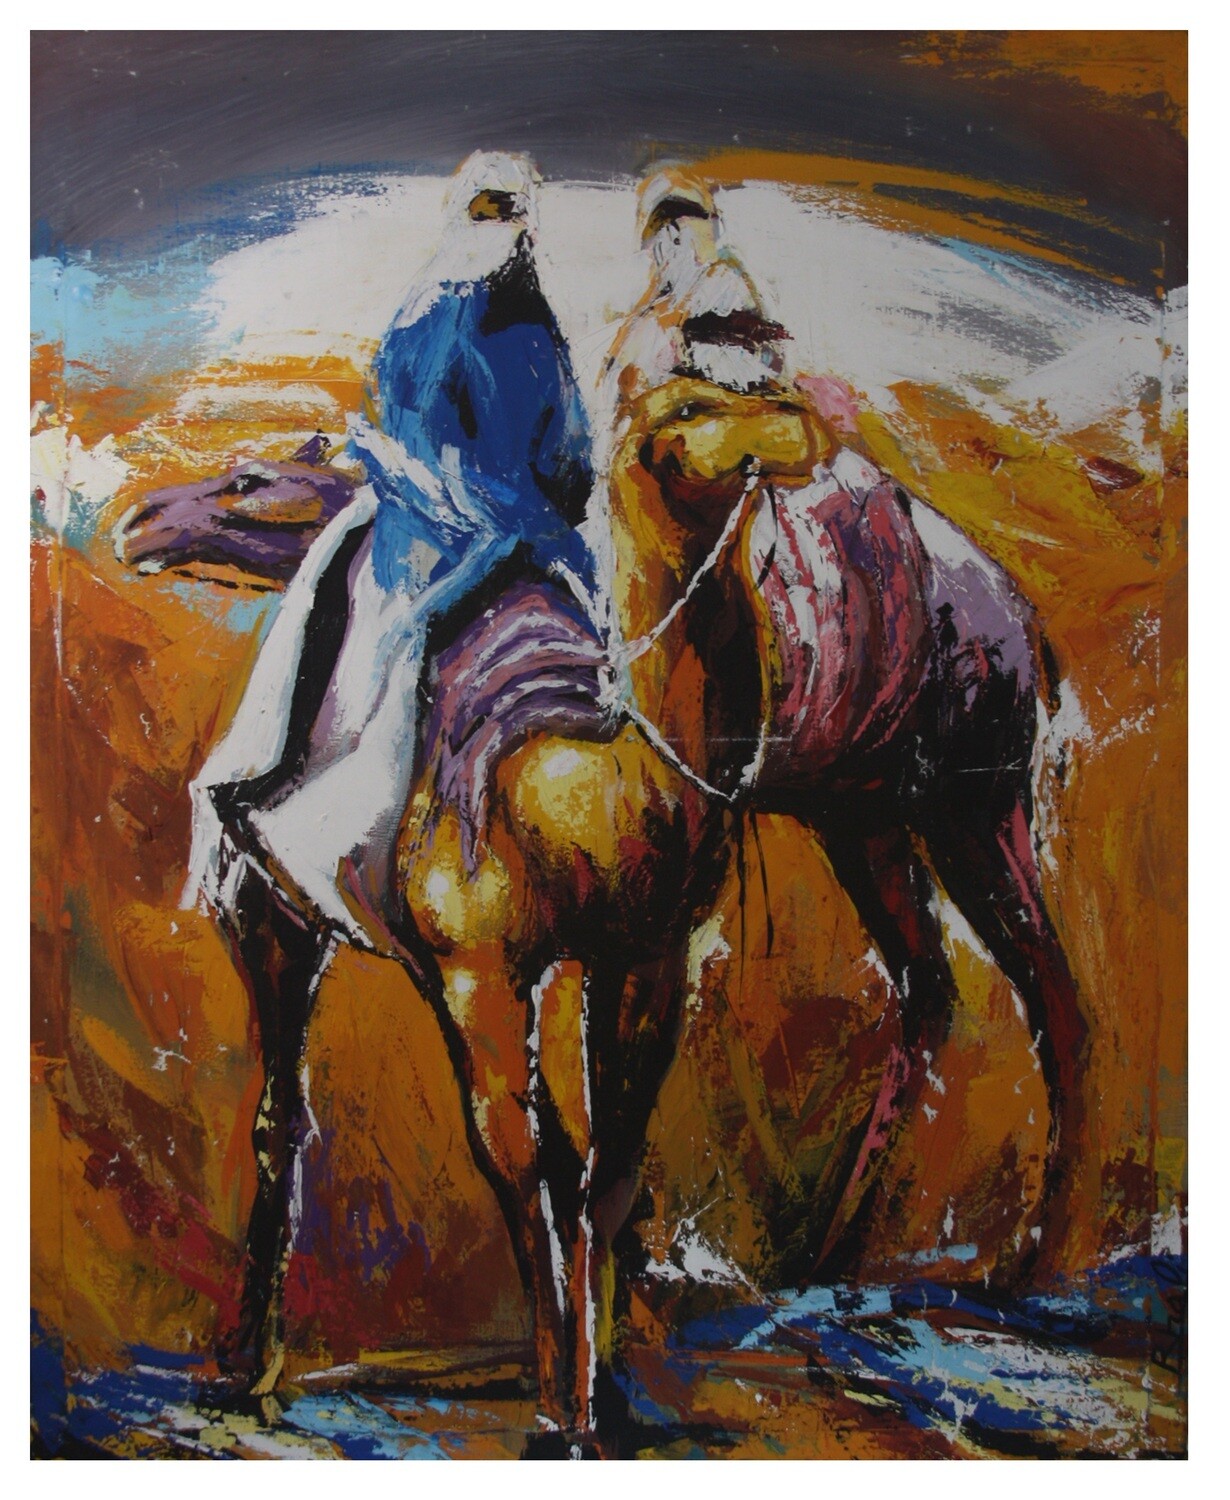 Camel Riders in the Sands of Fez - Textured Multi-Media Hand painted Canvas